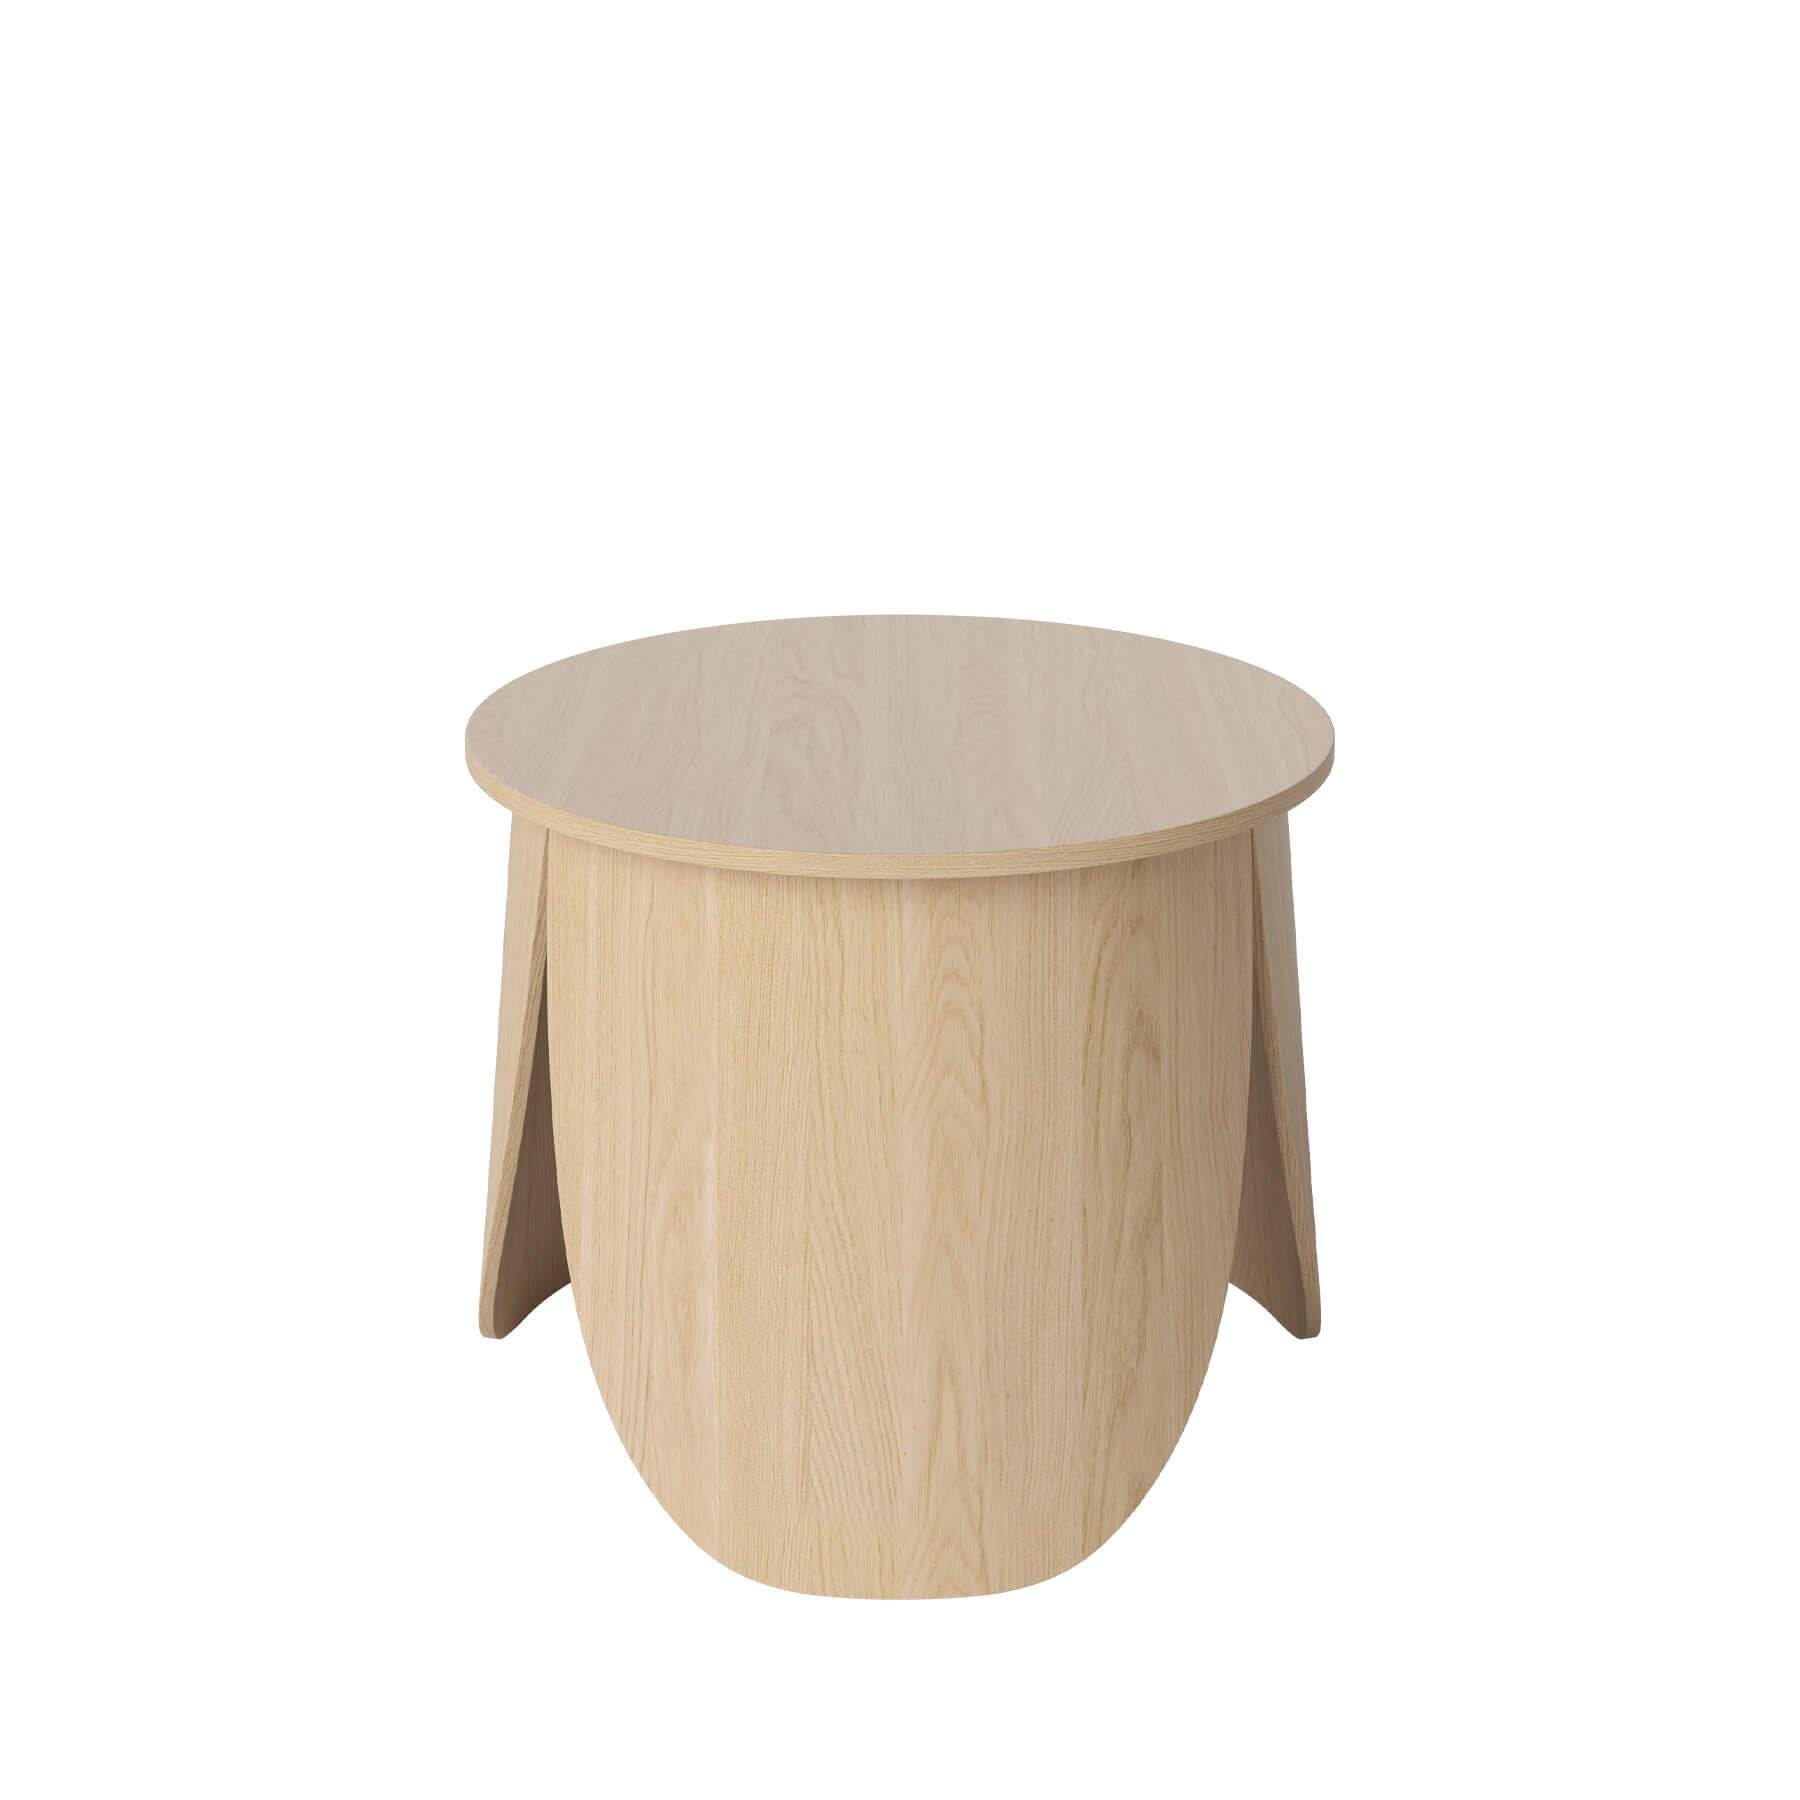 Bolia Peyote Coffee Table Small High White Lacquered Oak Light Wood Designer Furniture From Holloways Of Ludlow